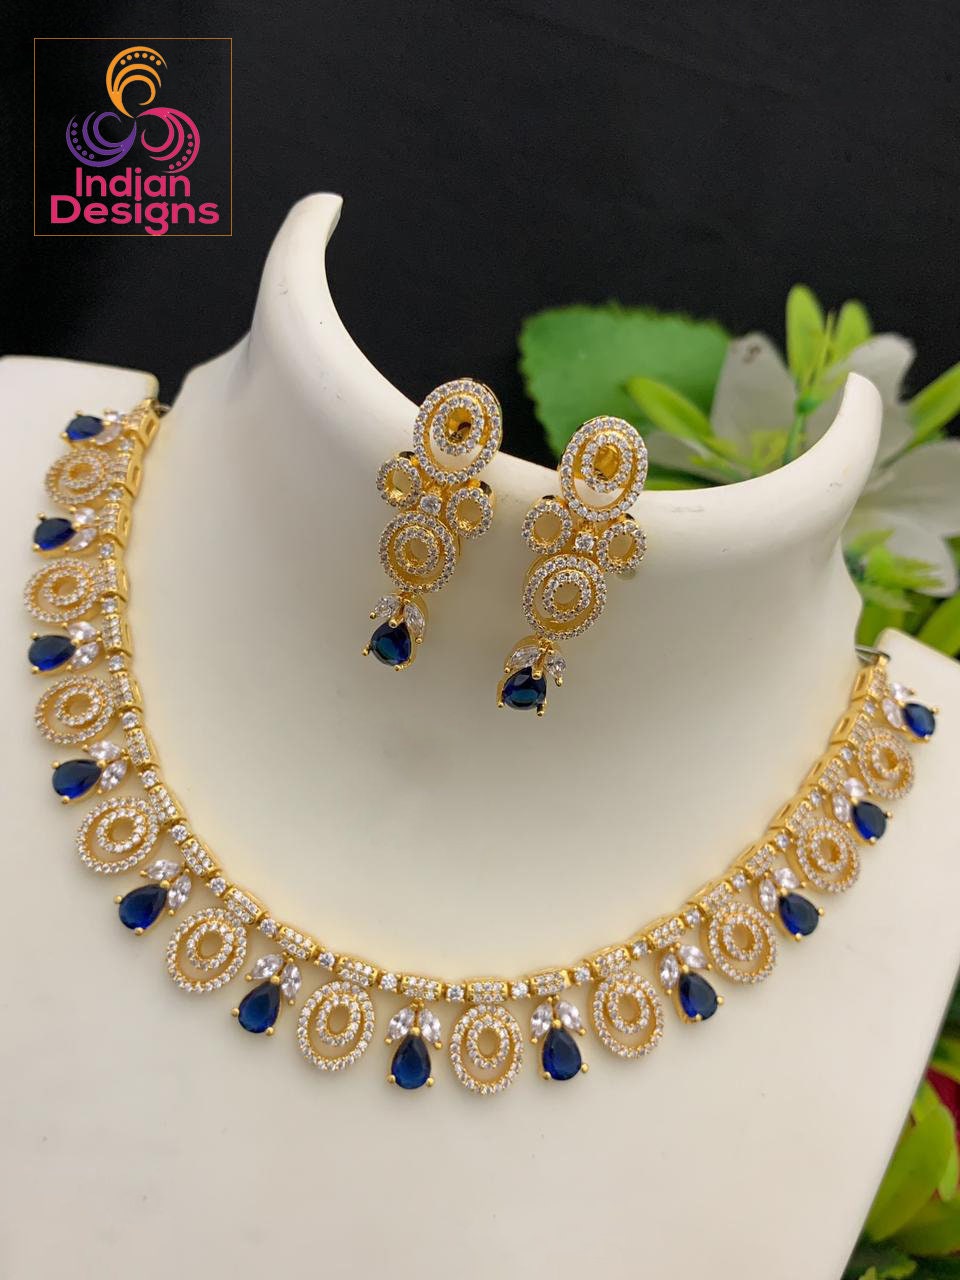 Indian Designs Exclusive Gold Plated American Diamond Necklace Earring Set | Tear-Drop Sapphire Blue 22Kt Gold Polish Indian jewelry